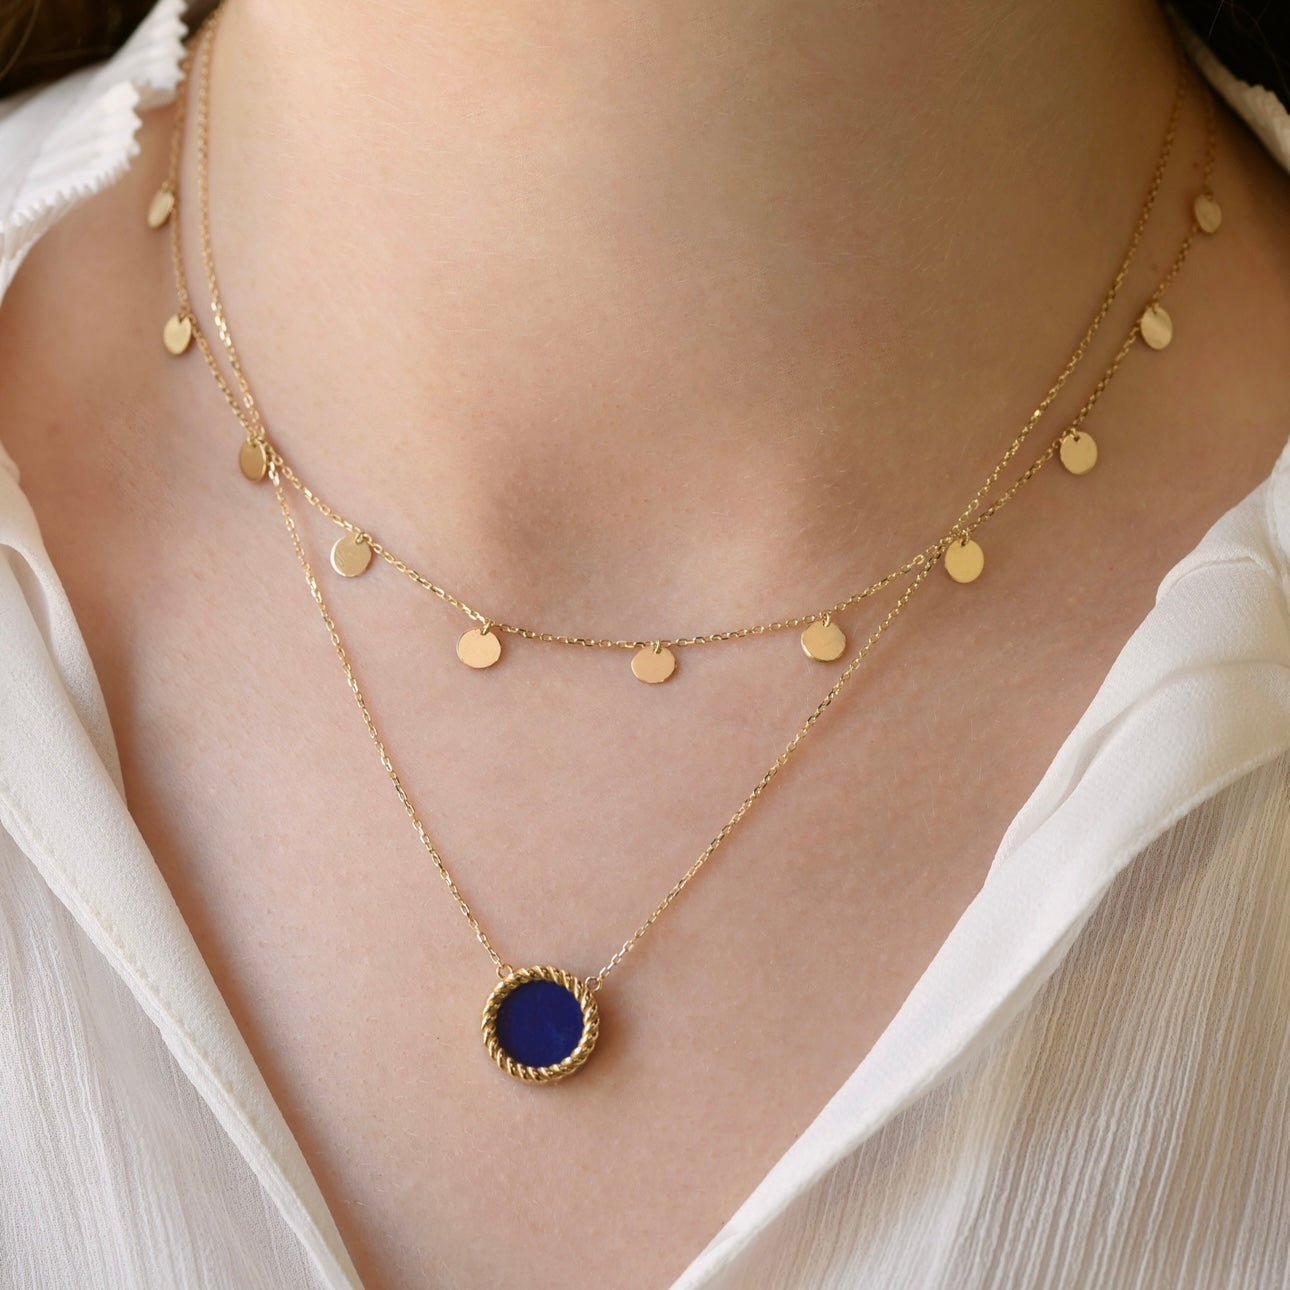 Cord Necklace in Lapis Lazuli - 18k Gold - Ly